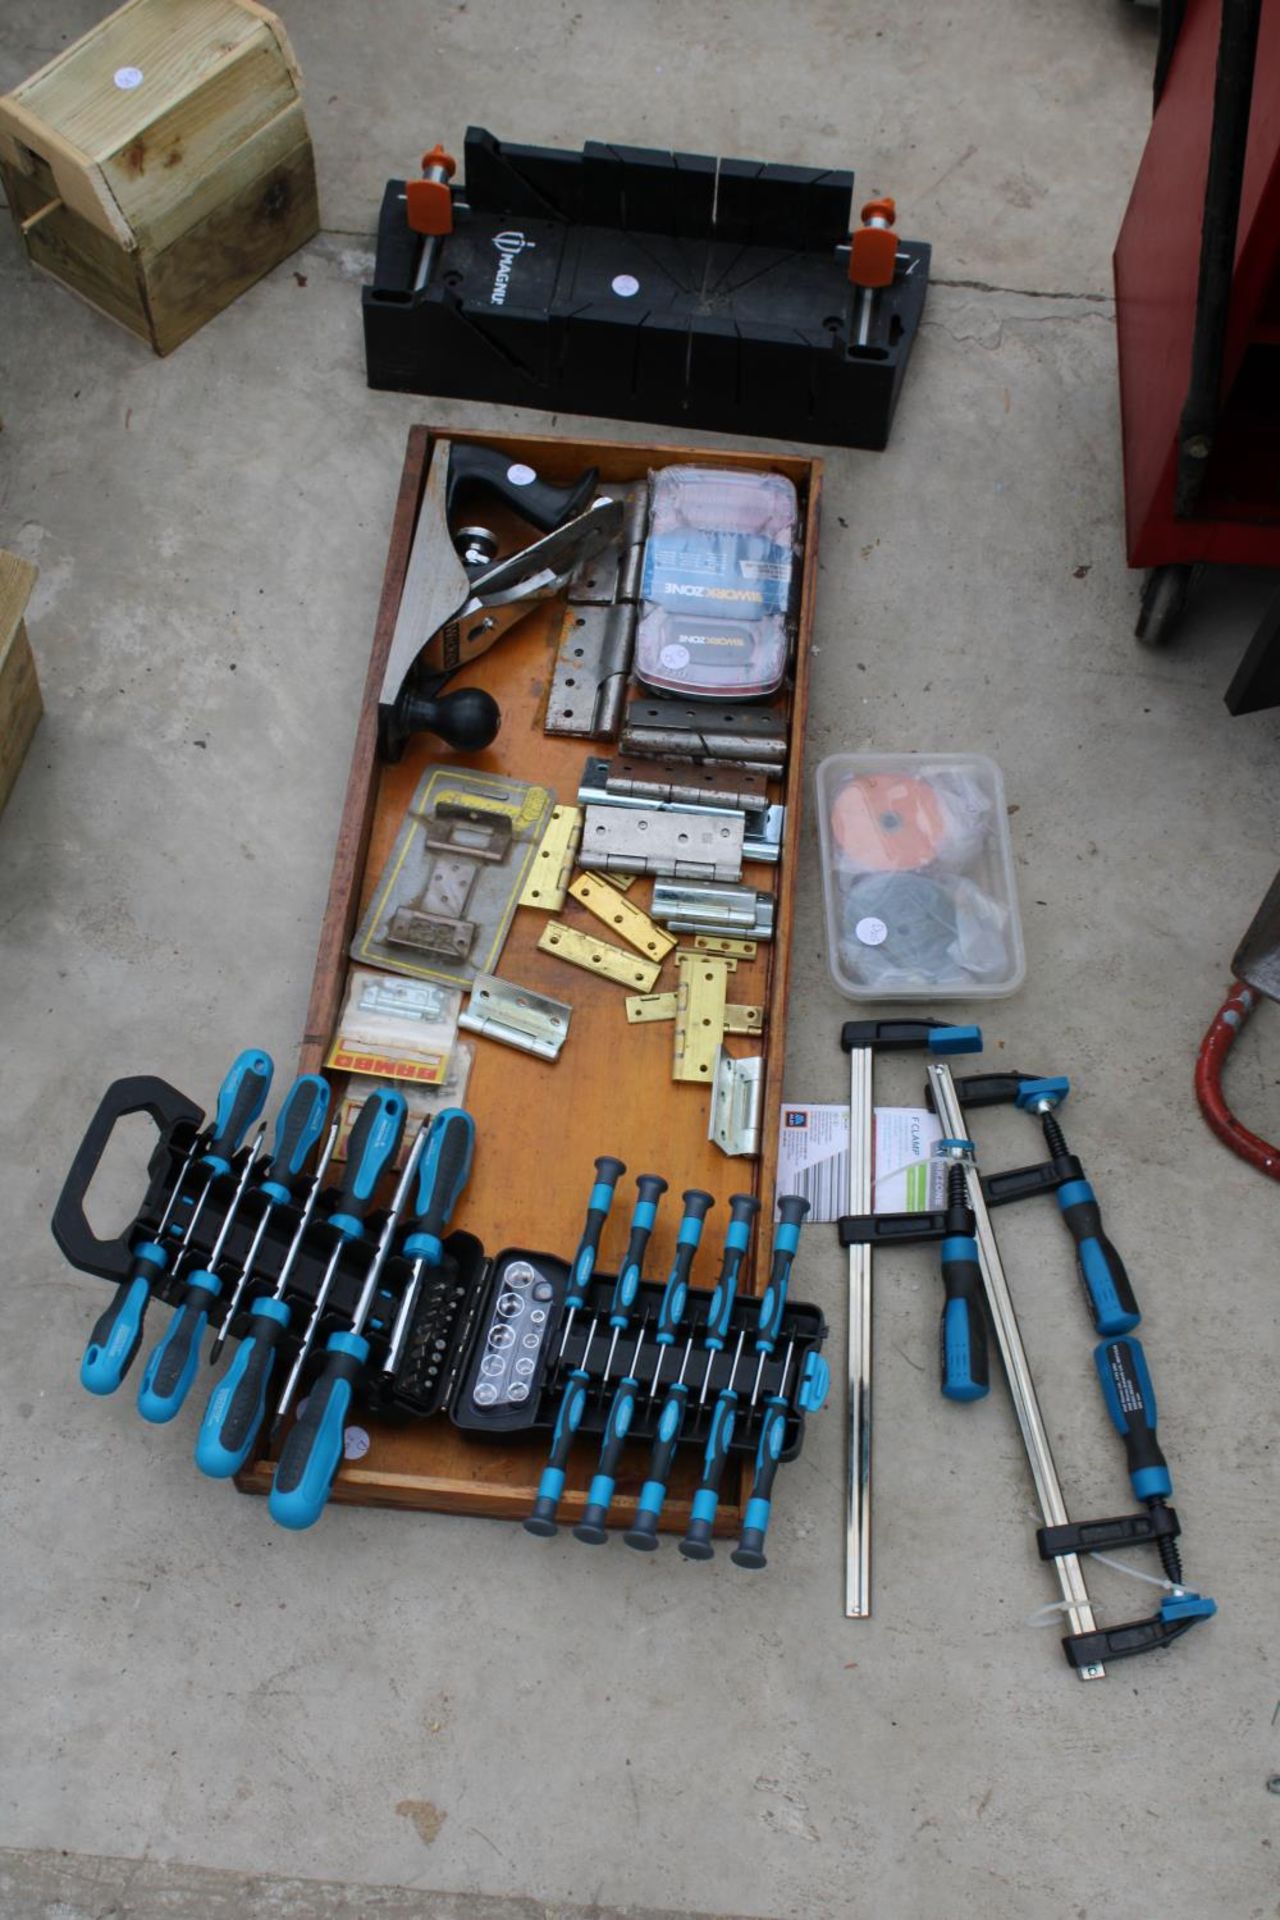 AN ASSORTMENT OF TOOLS TO INCLUDE A SCREW DRIVER SET, CLAMPS AND A WOOD PLANE ETC